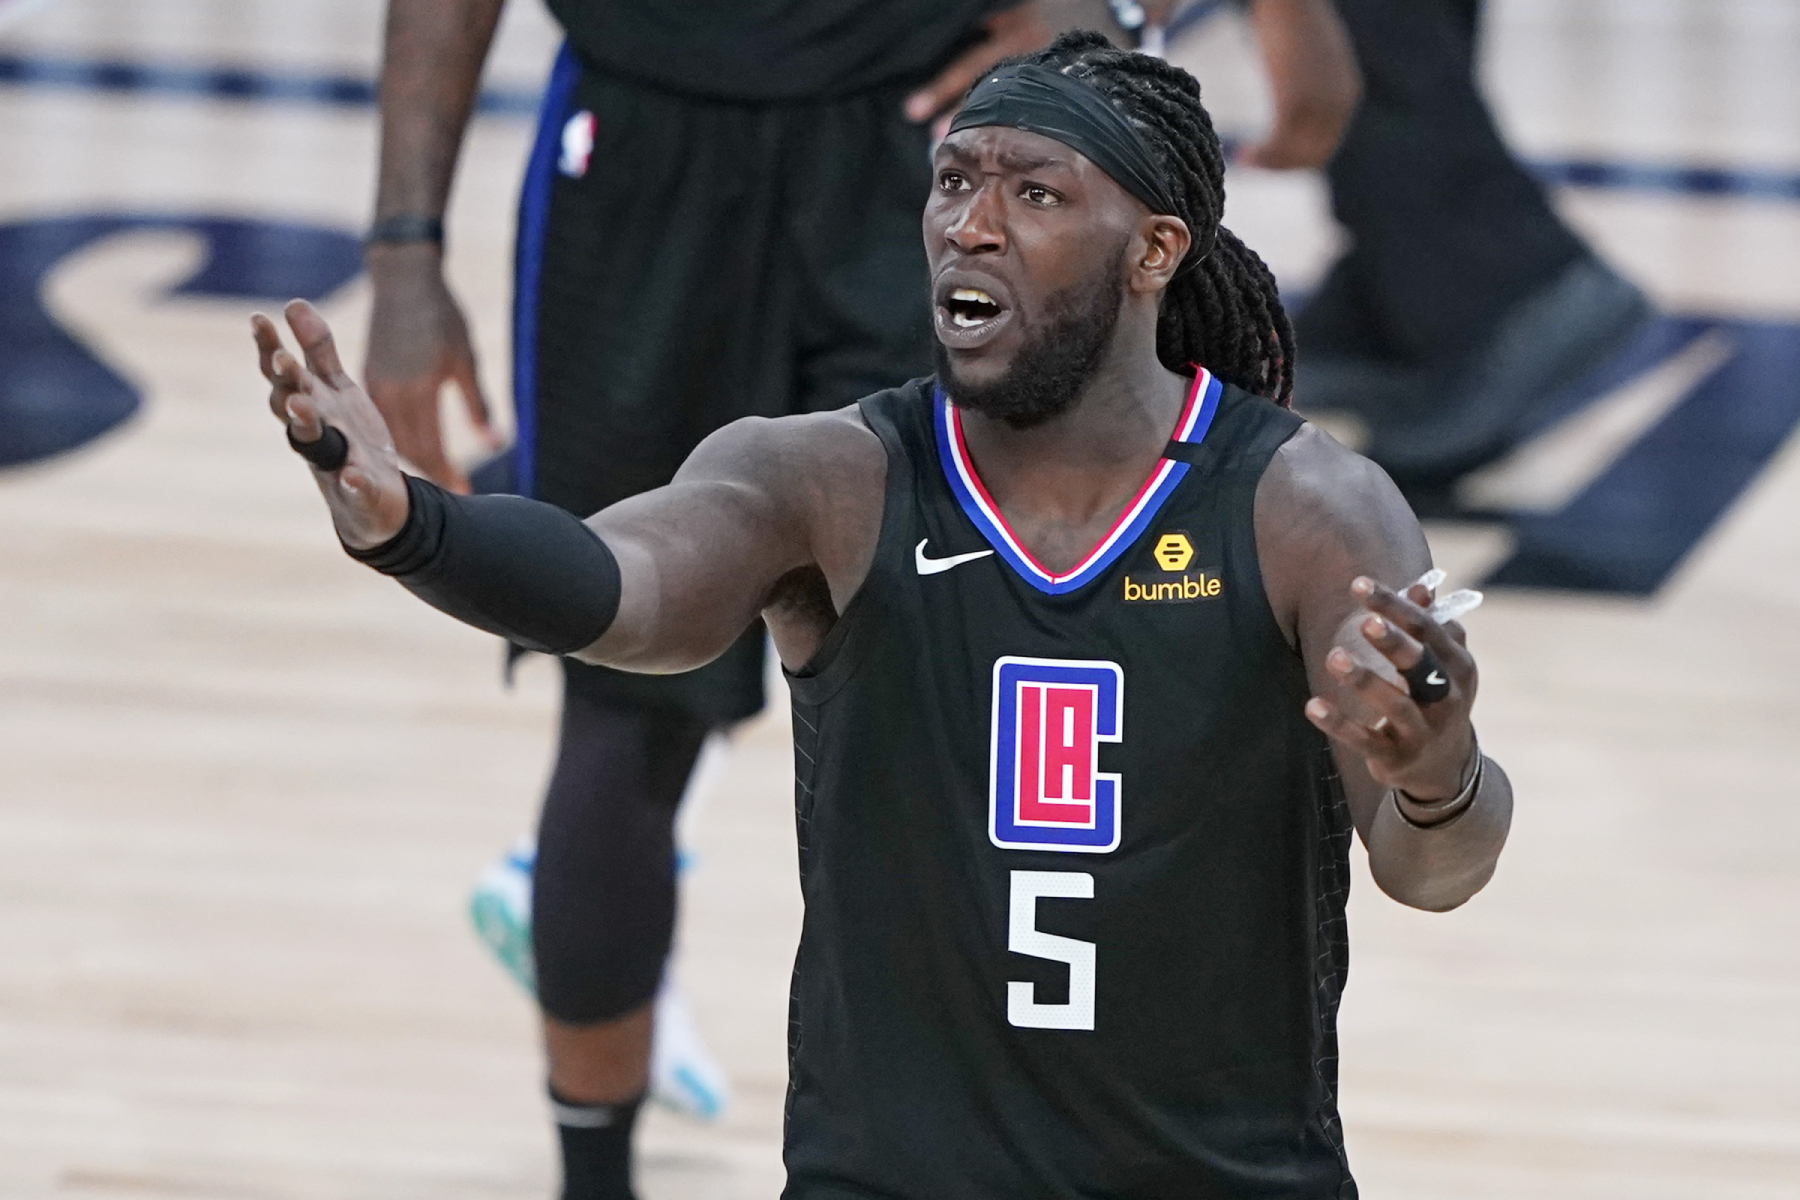 Clippers star Montrezl Harrell just won the Sixth Man of the Year Award. In the 2015 NBA draft, though, teams passed over him for bad players.